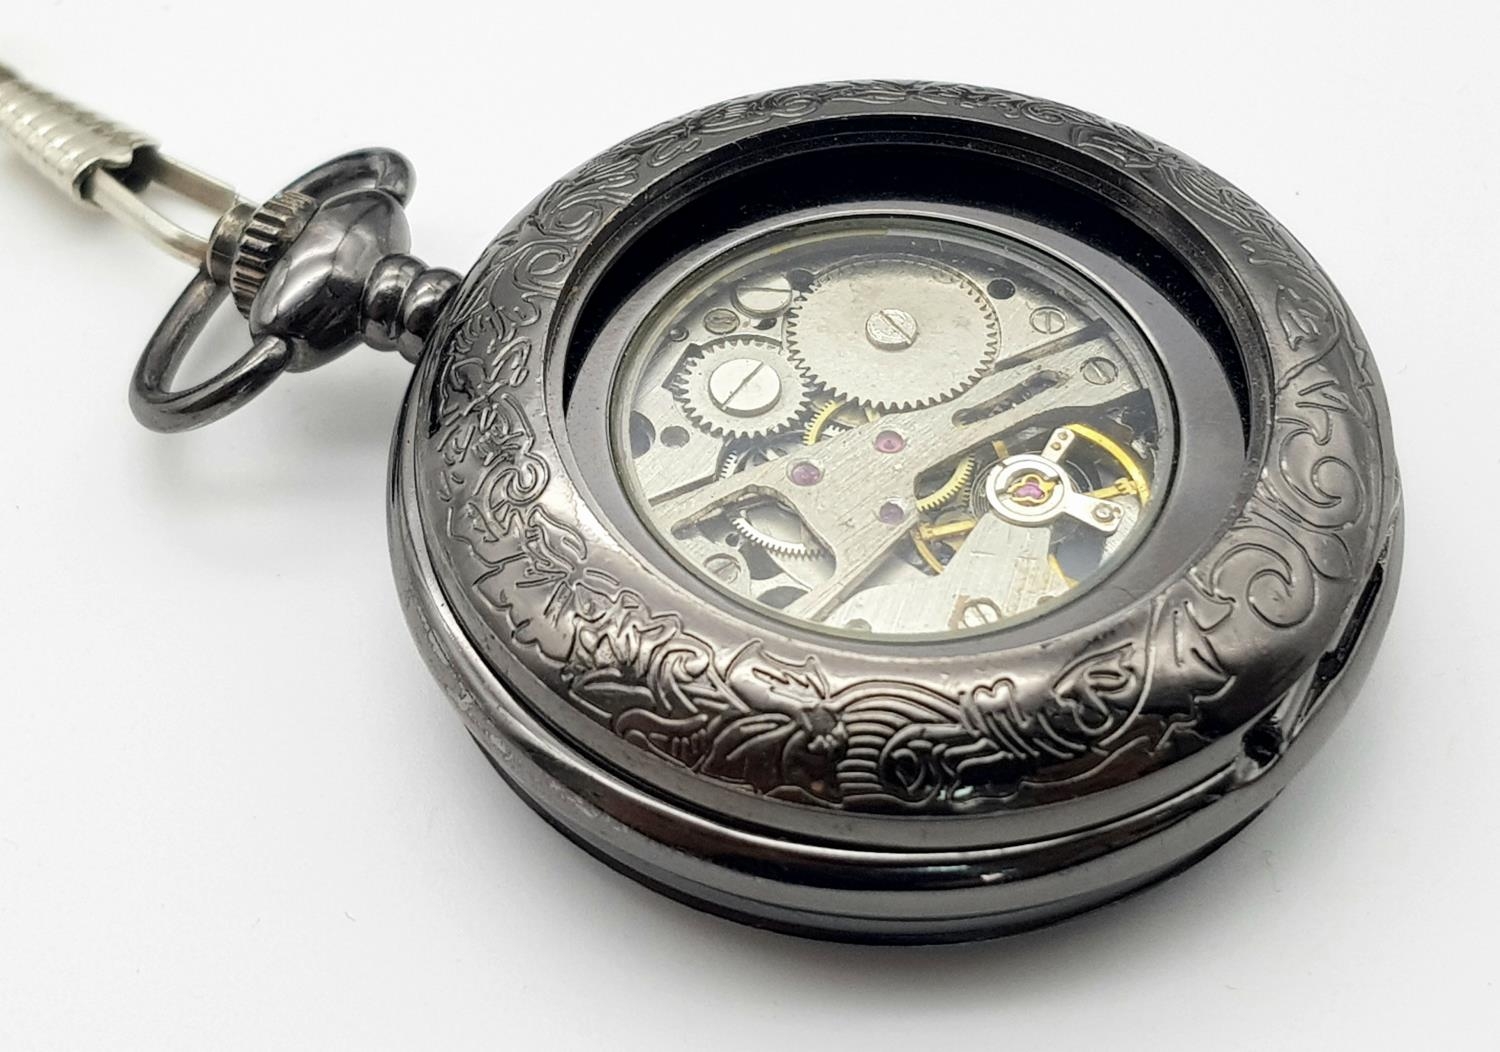 A Parcel of Two Men’s Dress Watches Comprising; 1) A Manual Wind Gun Metal Grey Pocket Watch by - Image 4 of 6